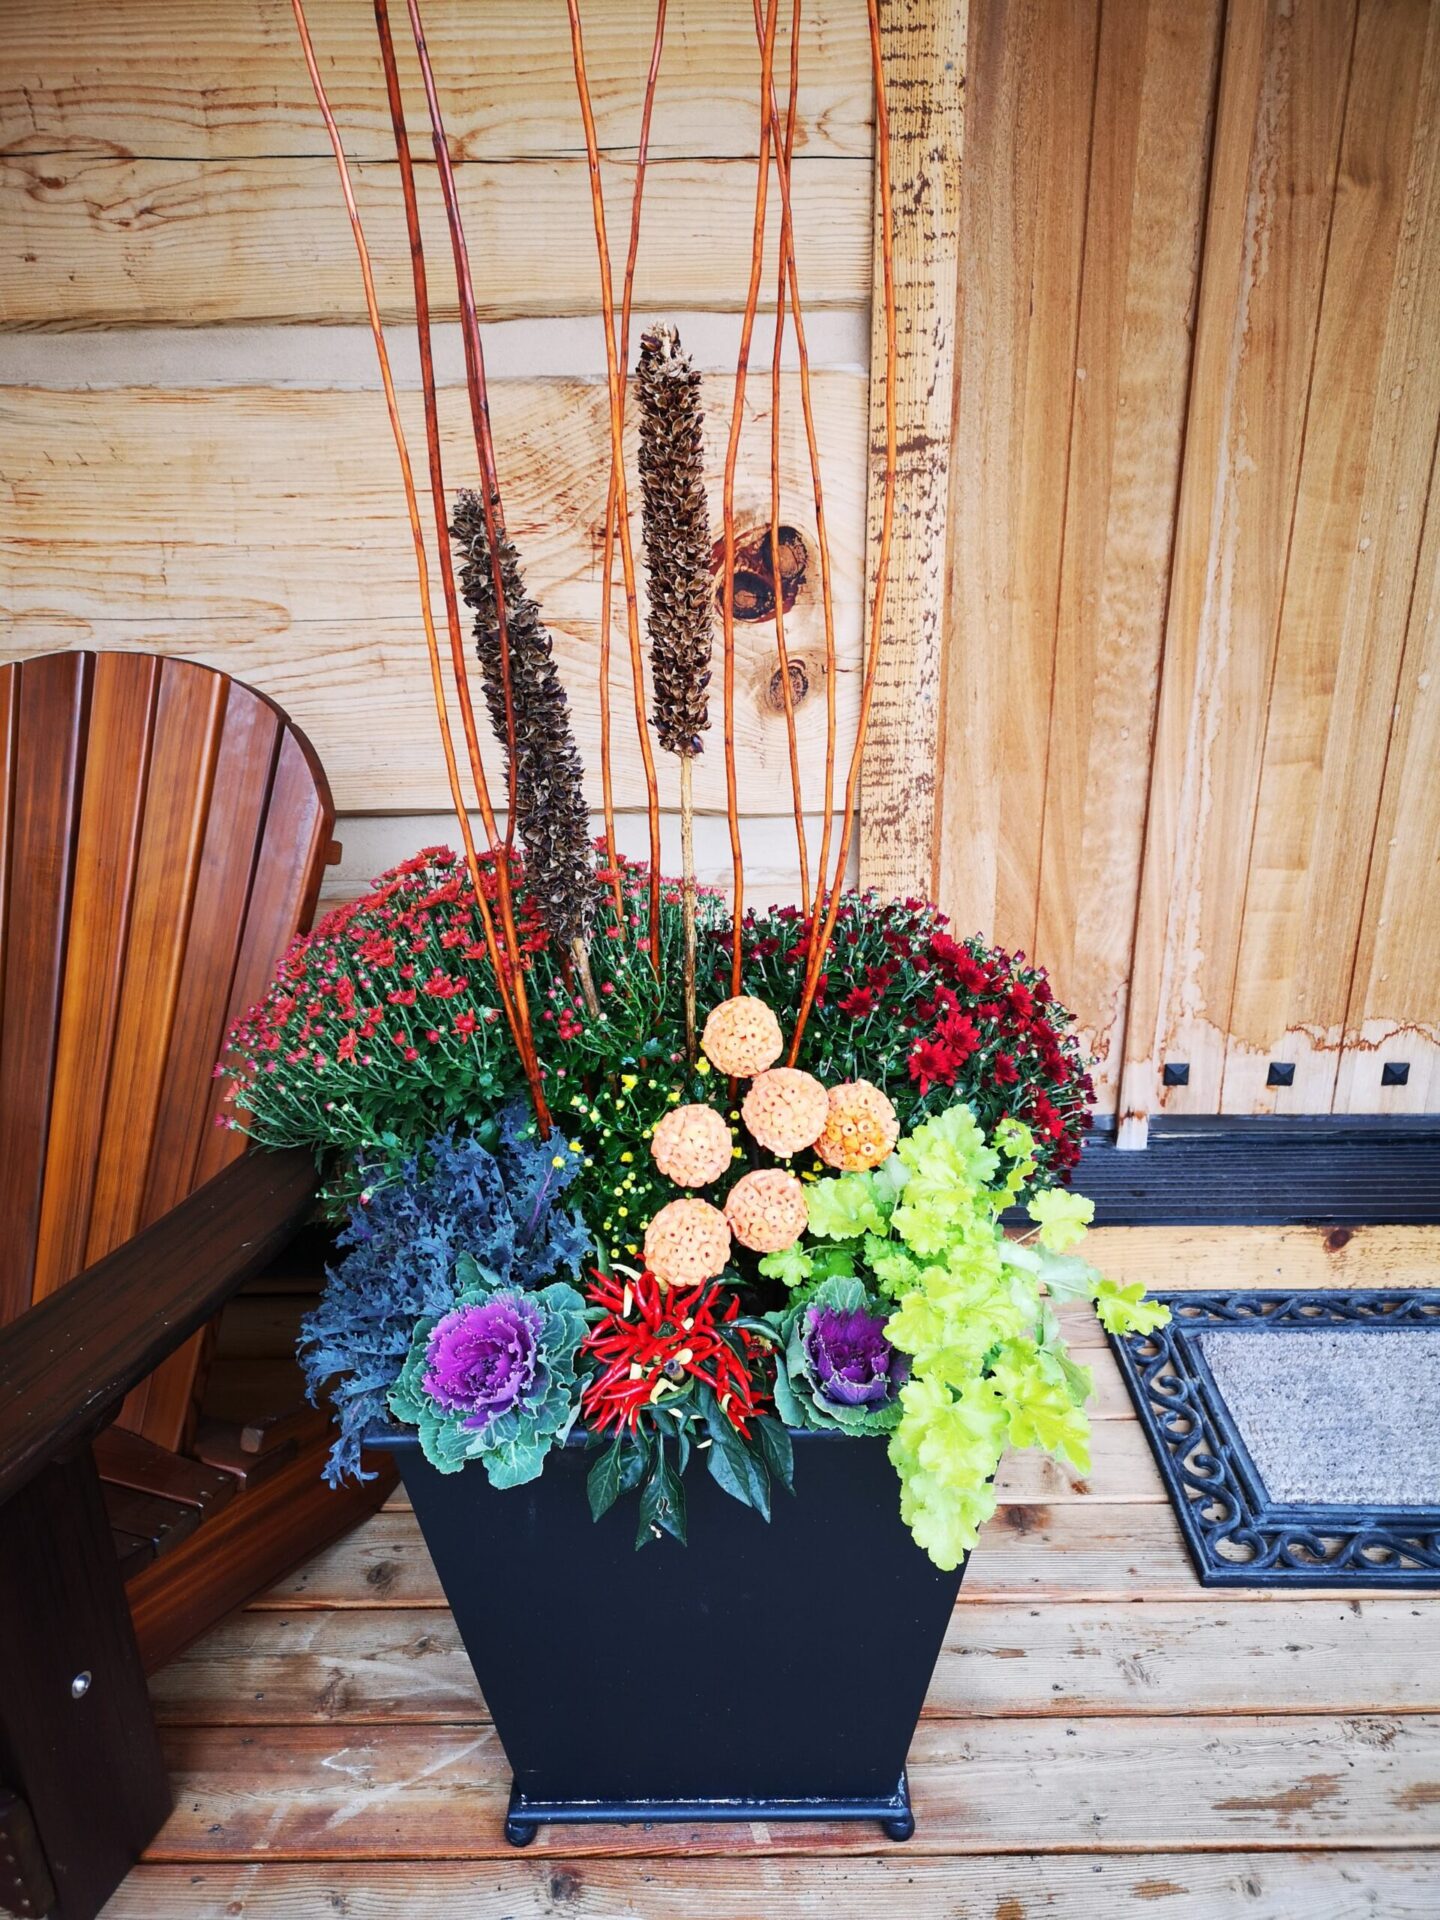 A vibrant floral arrangement in a black planter against a wooden background with tall decorative sticks, surrounded by rustic outdoor elements, including a bench.